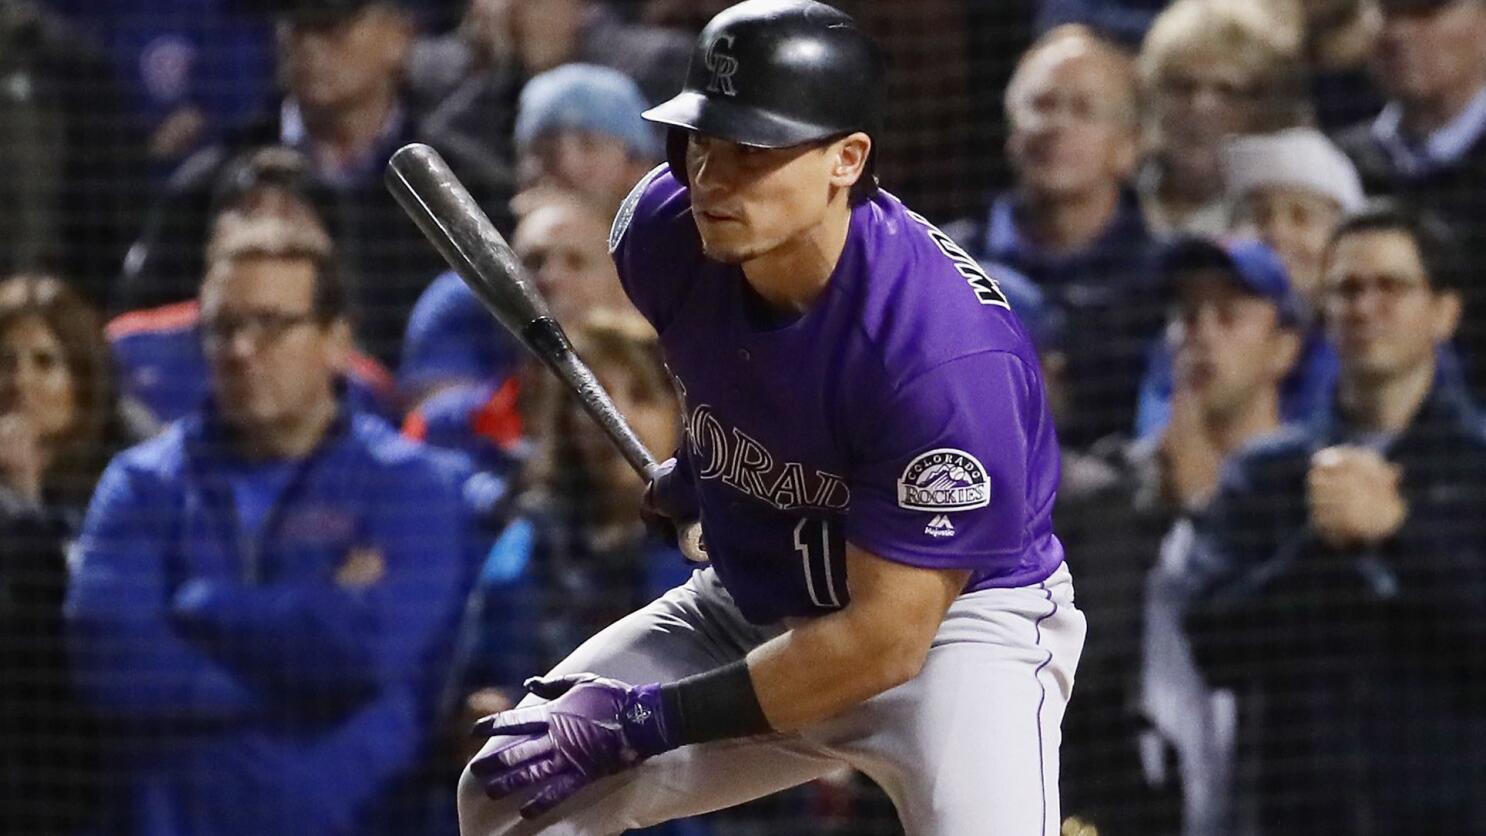 For Vista's Tony Wolters, big moment arrives in Rockies' wild-card